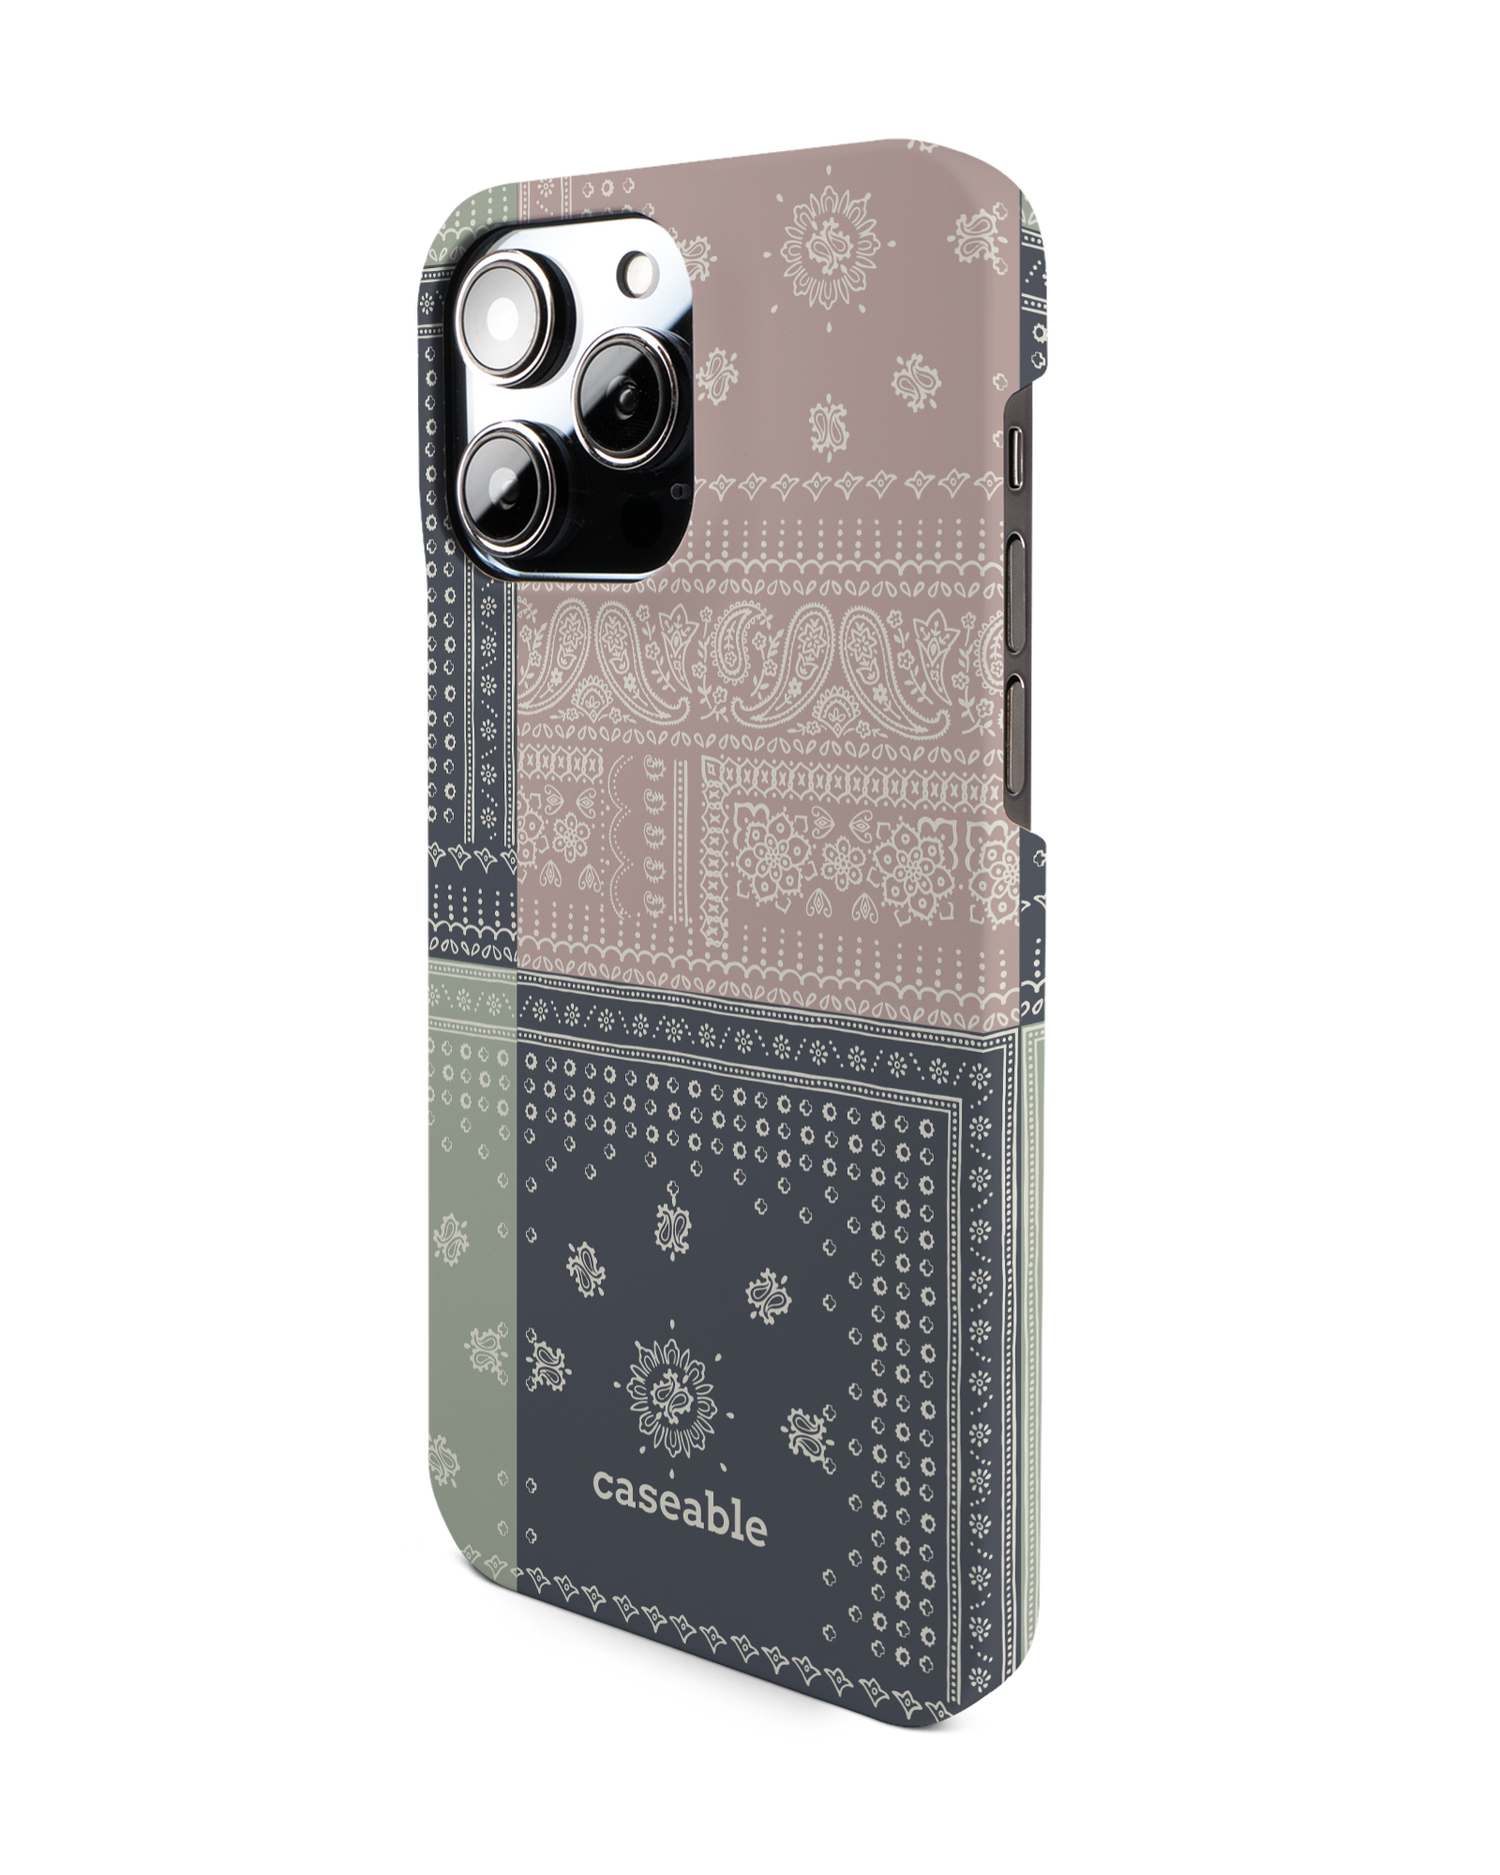 Bandana Patchwork Hard Shell Phone Case for Apple iPhone 14 Pro Max: View from the right side